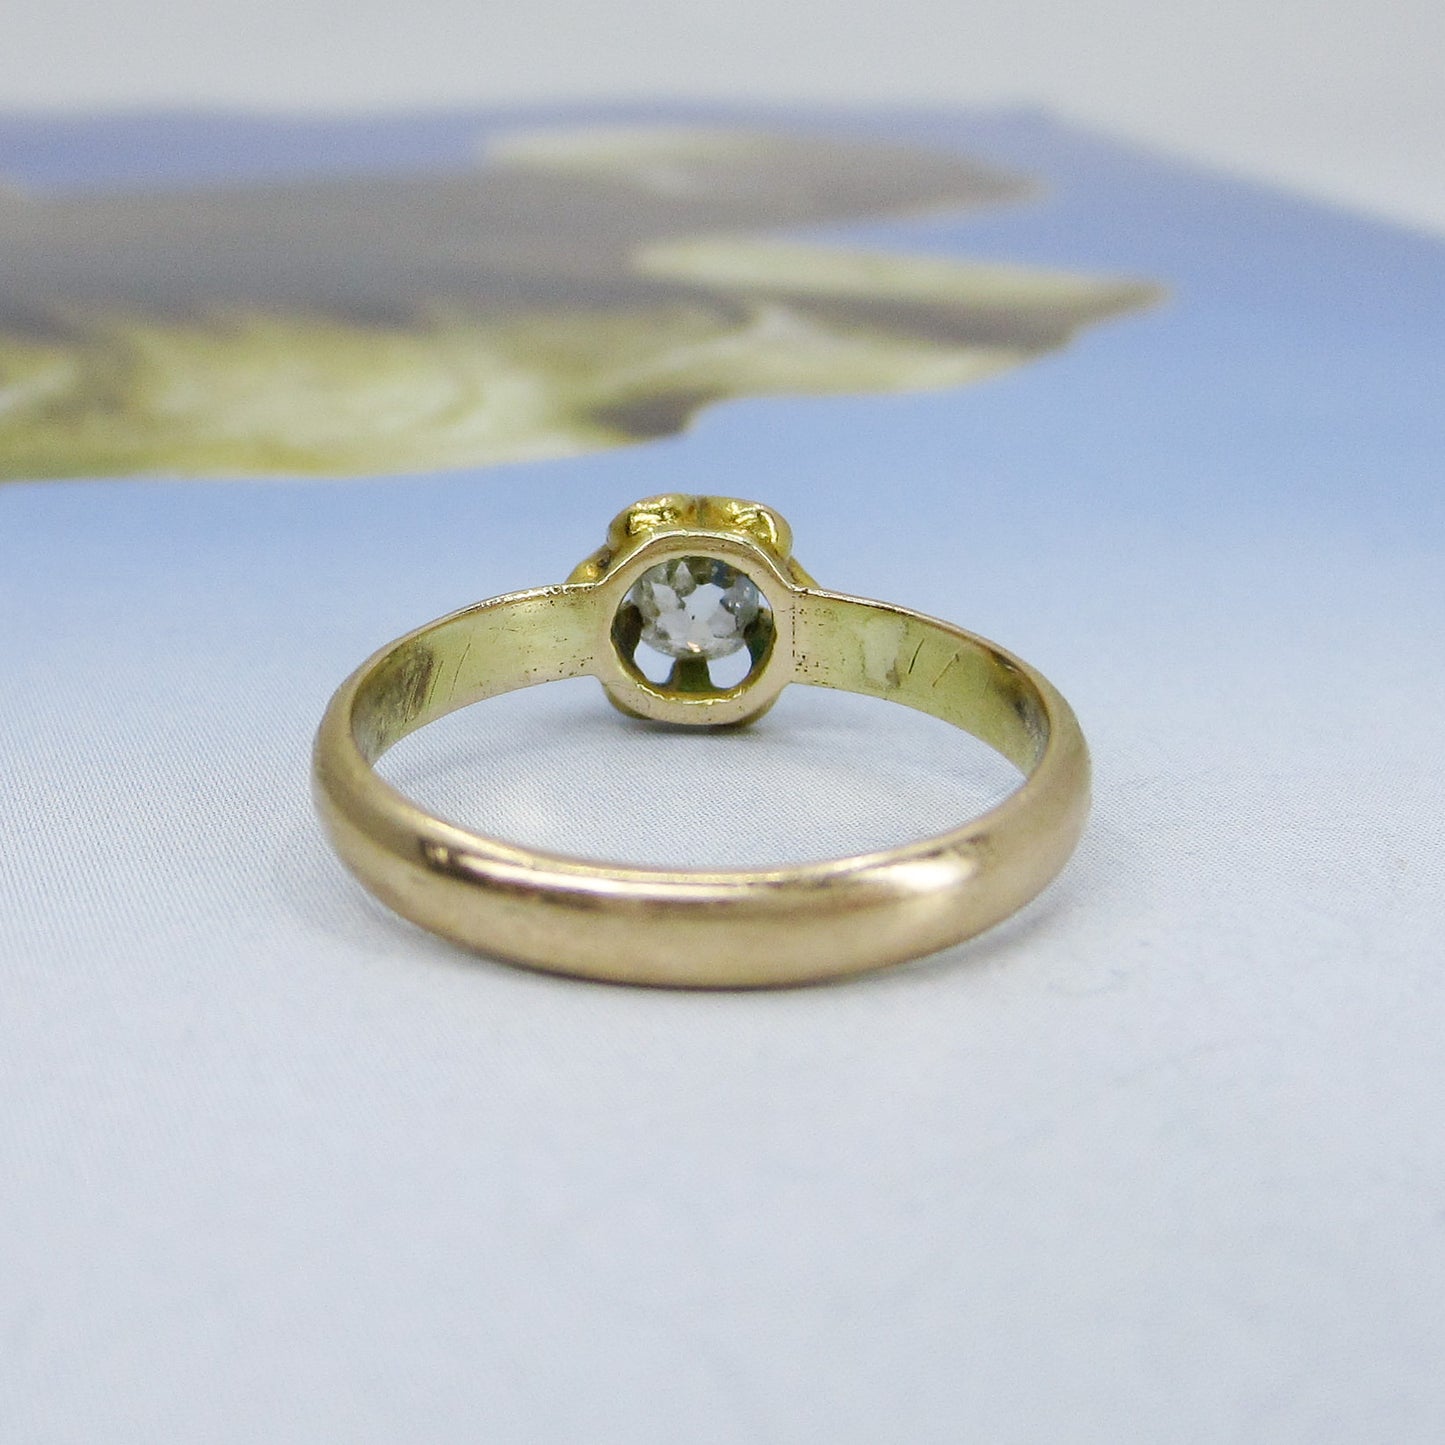 SOLD-Victorian Old Mine Diamond and Enamel Engraved Band Ring 14k c. 1840